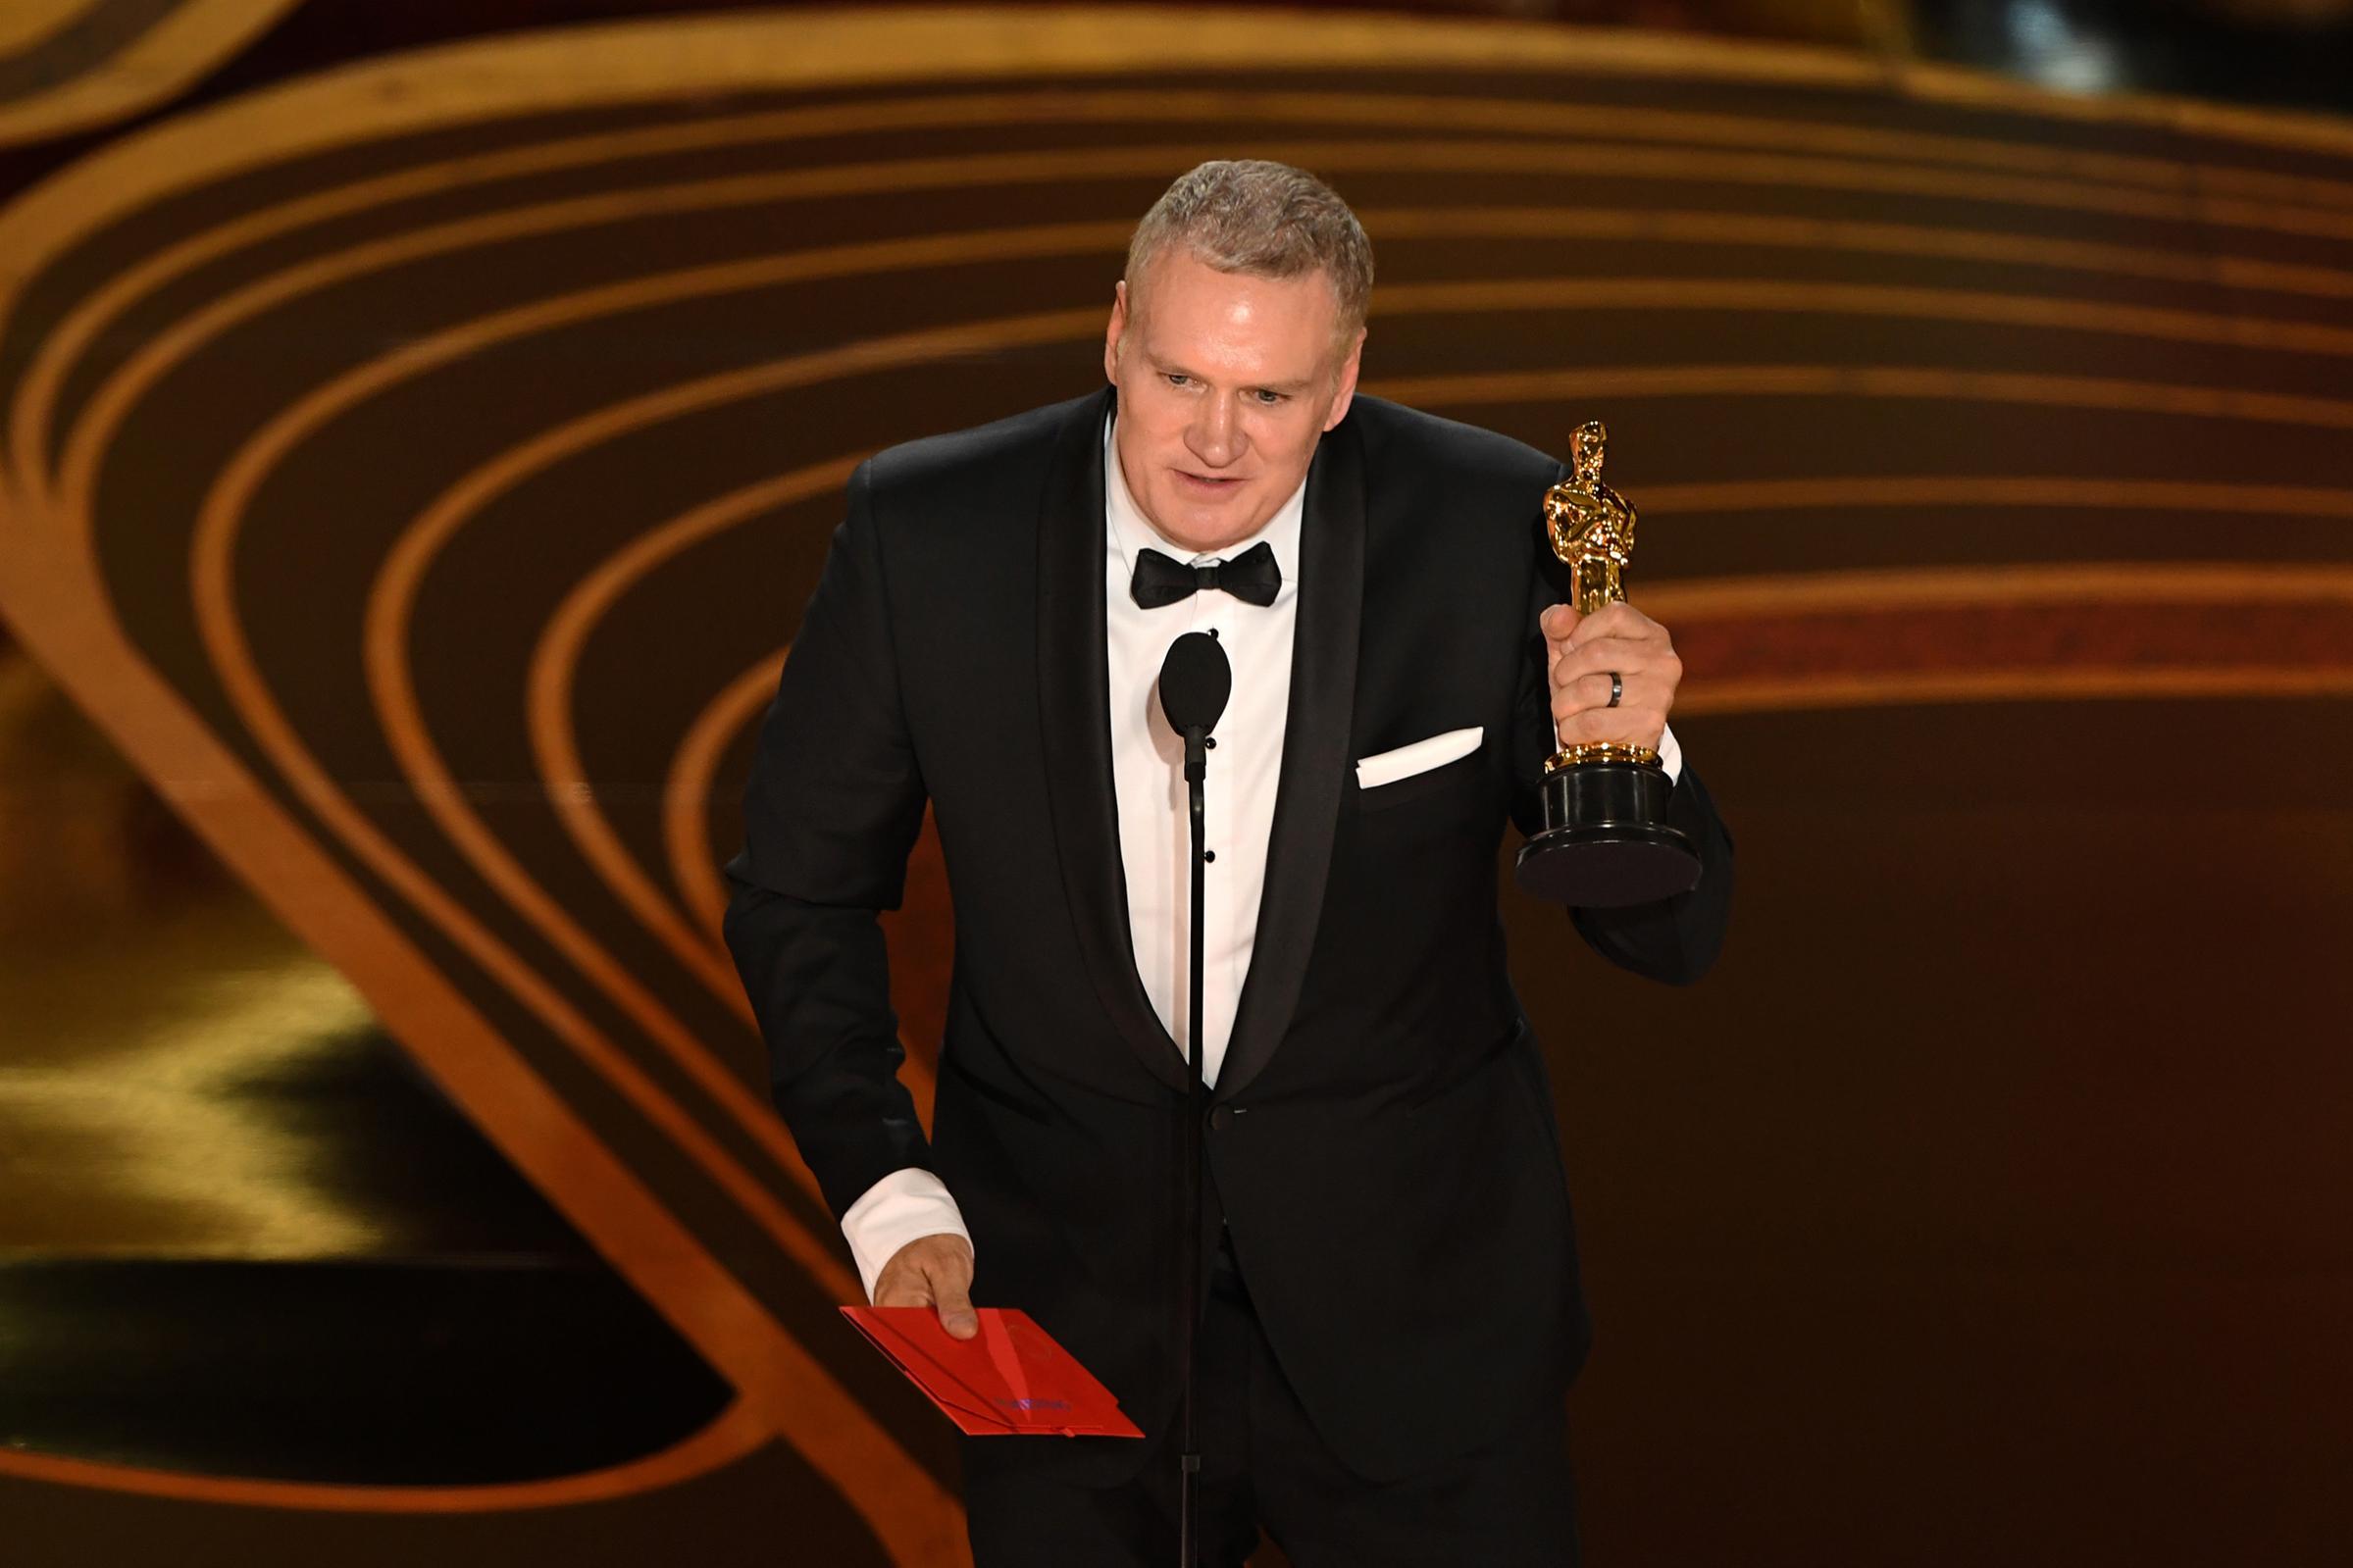 Best Film Editing nominee for "Bohemian Rhapsody" John Ottman accepts the award for Best Film Editing during the 91st Annual Academy Awards at the Dolby Theatre in Hollywood on Feb. 24, 2019.